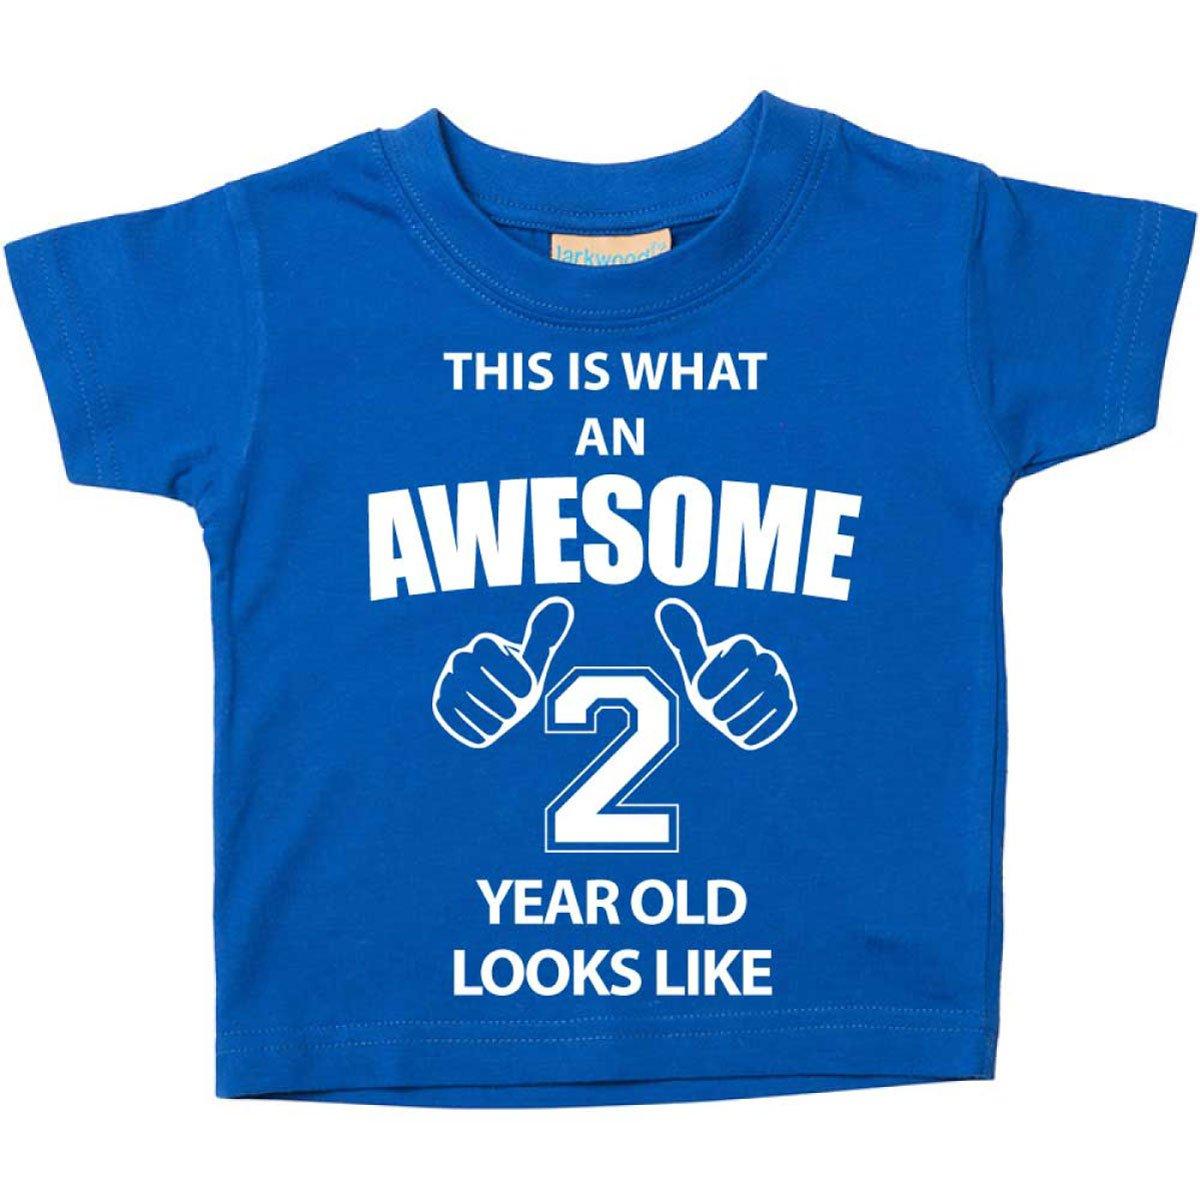 This is What An Awesome 2 Year Old Looks Like Blue Tshirt